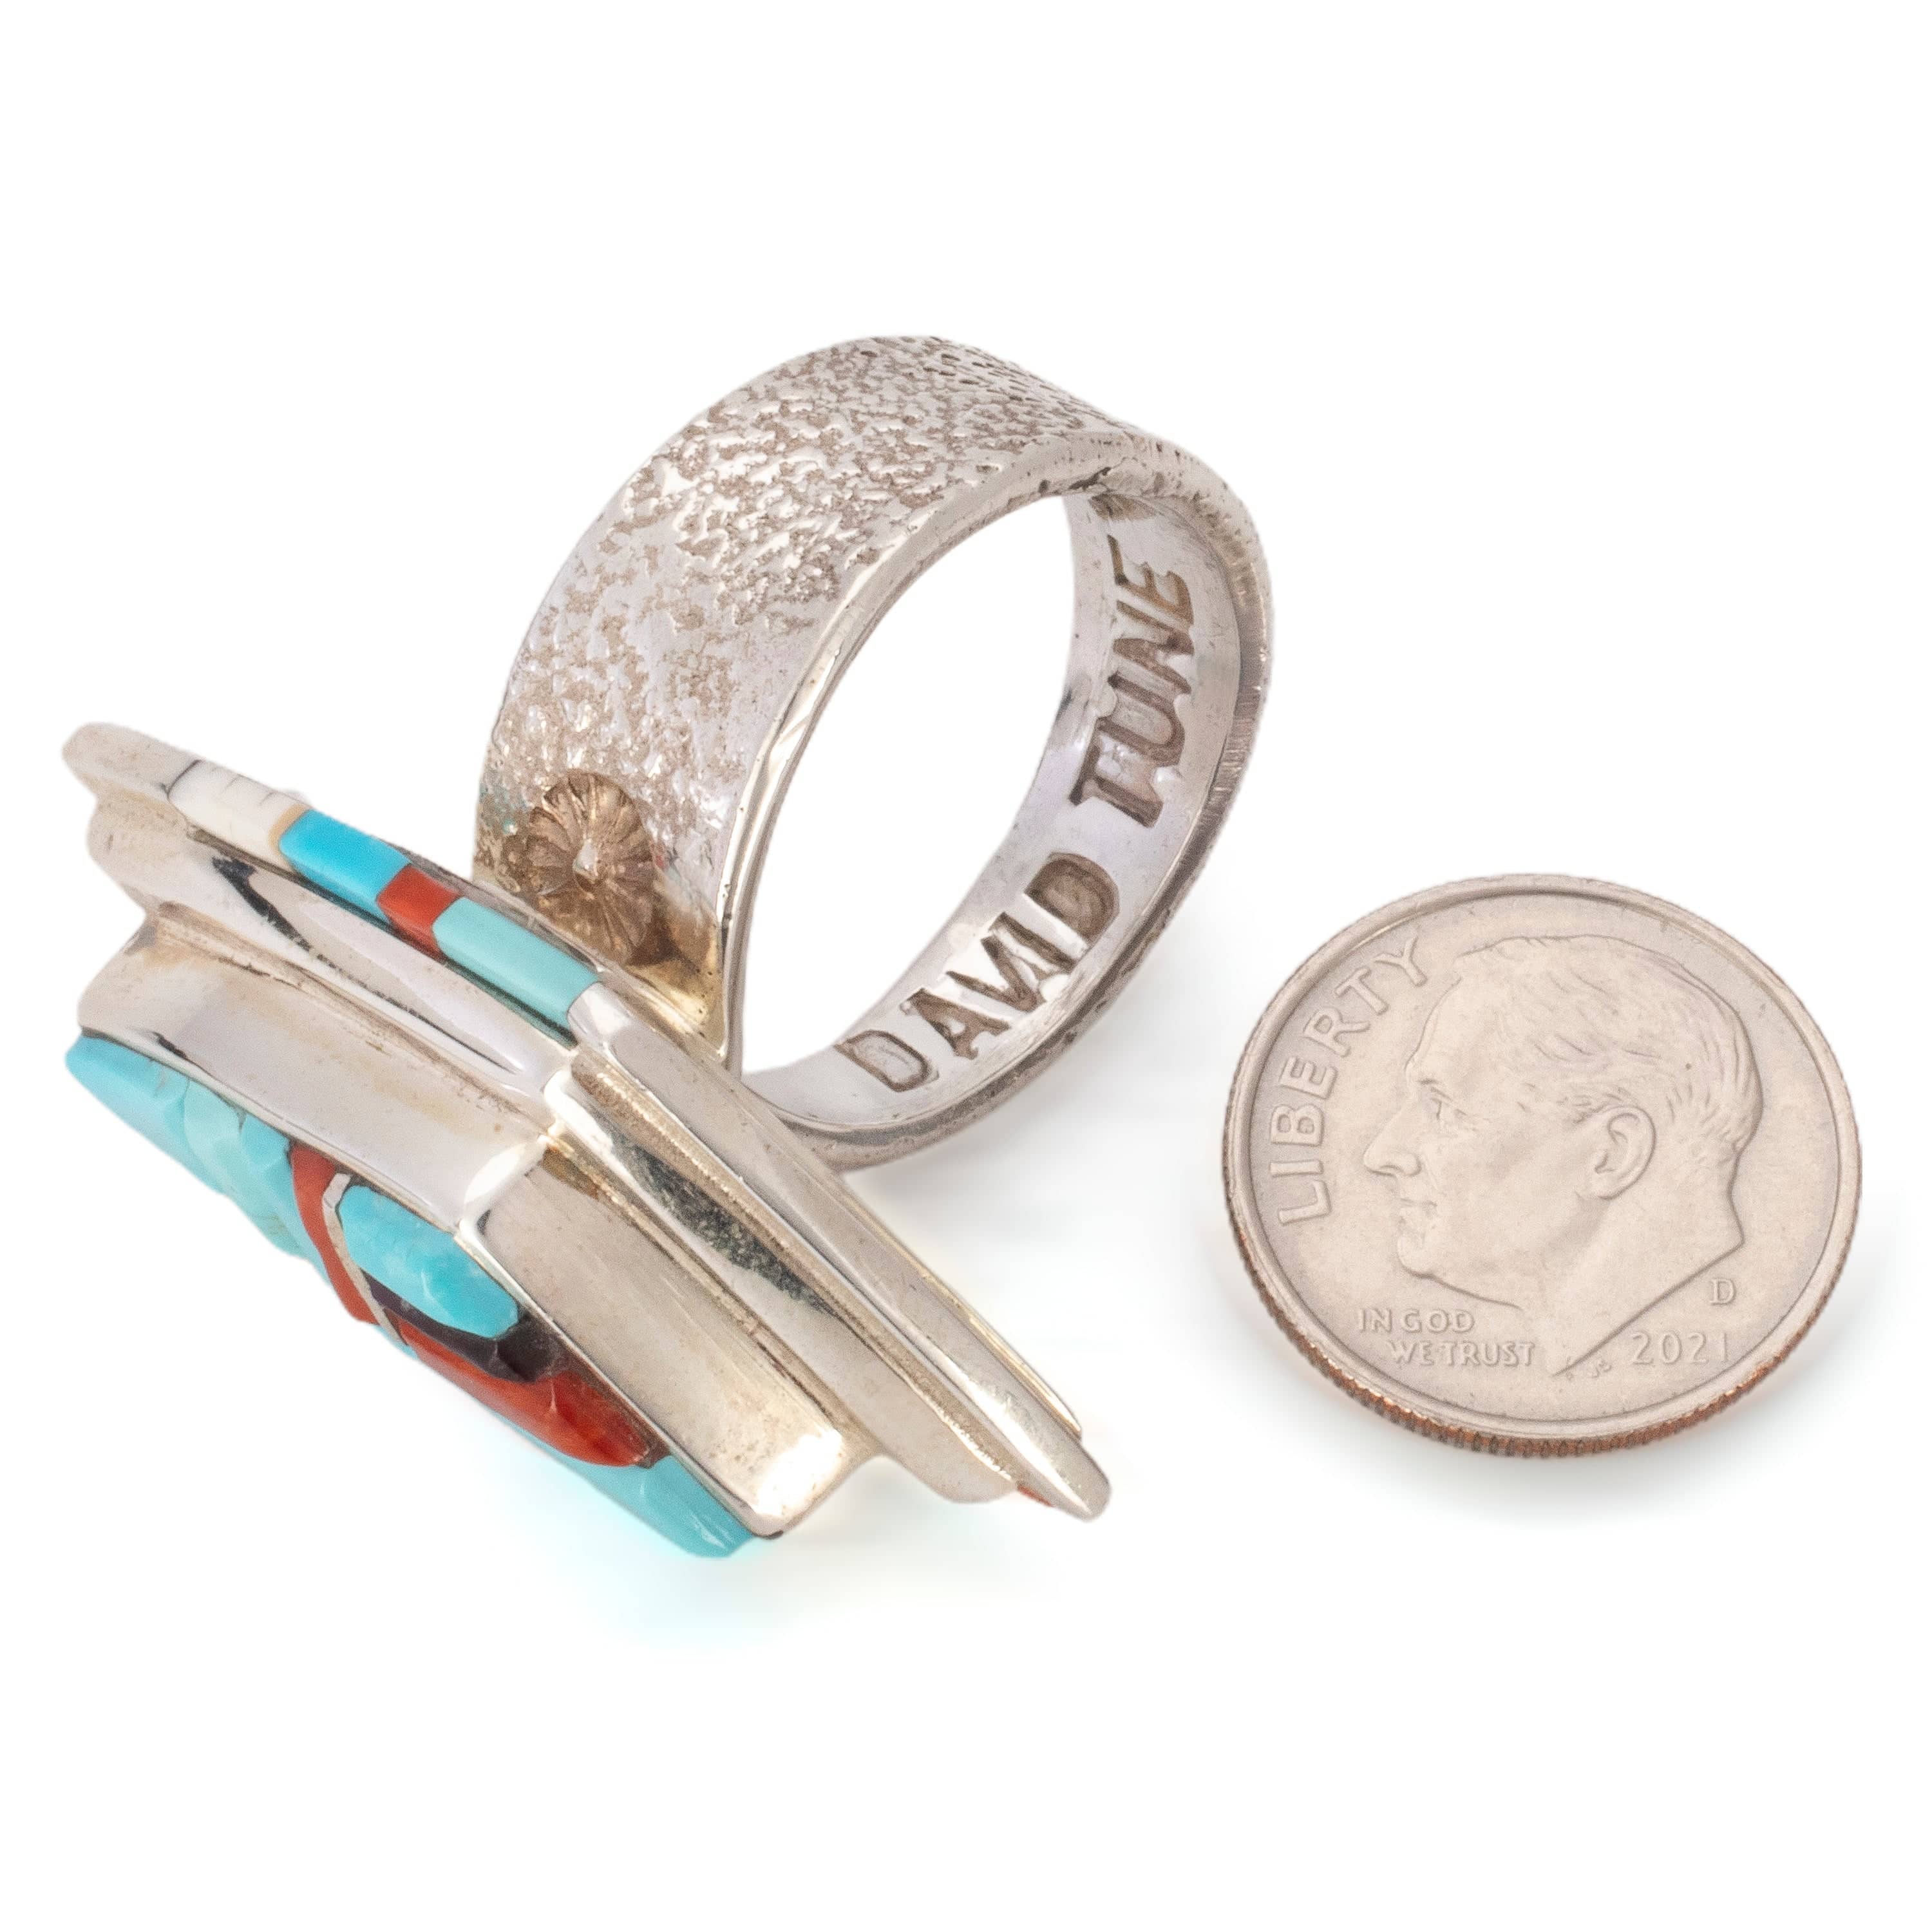 Kalifano Native American Jewelry 10 David Tune Navajo Sleeping Beauty Turquoise, Coral, and Sugilite USA Native American Made 925 Sterling Silver Ring NAR1600.010.10